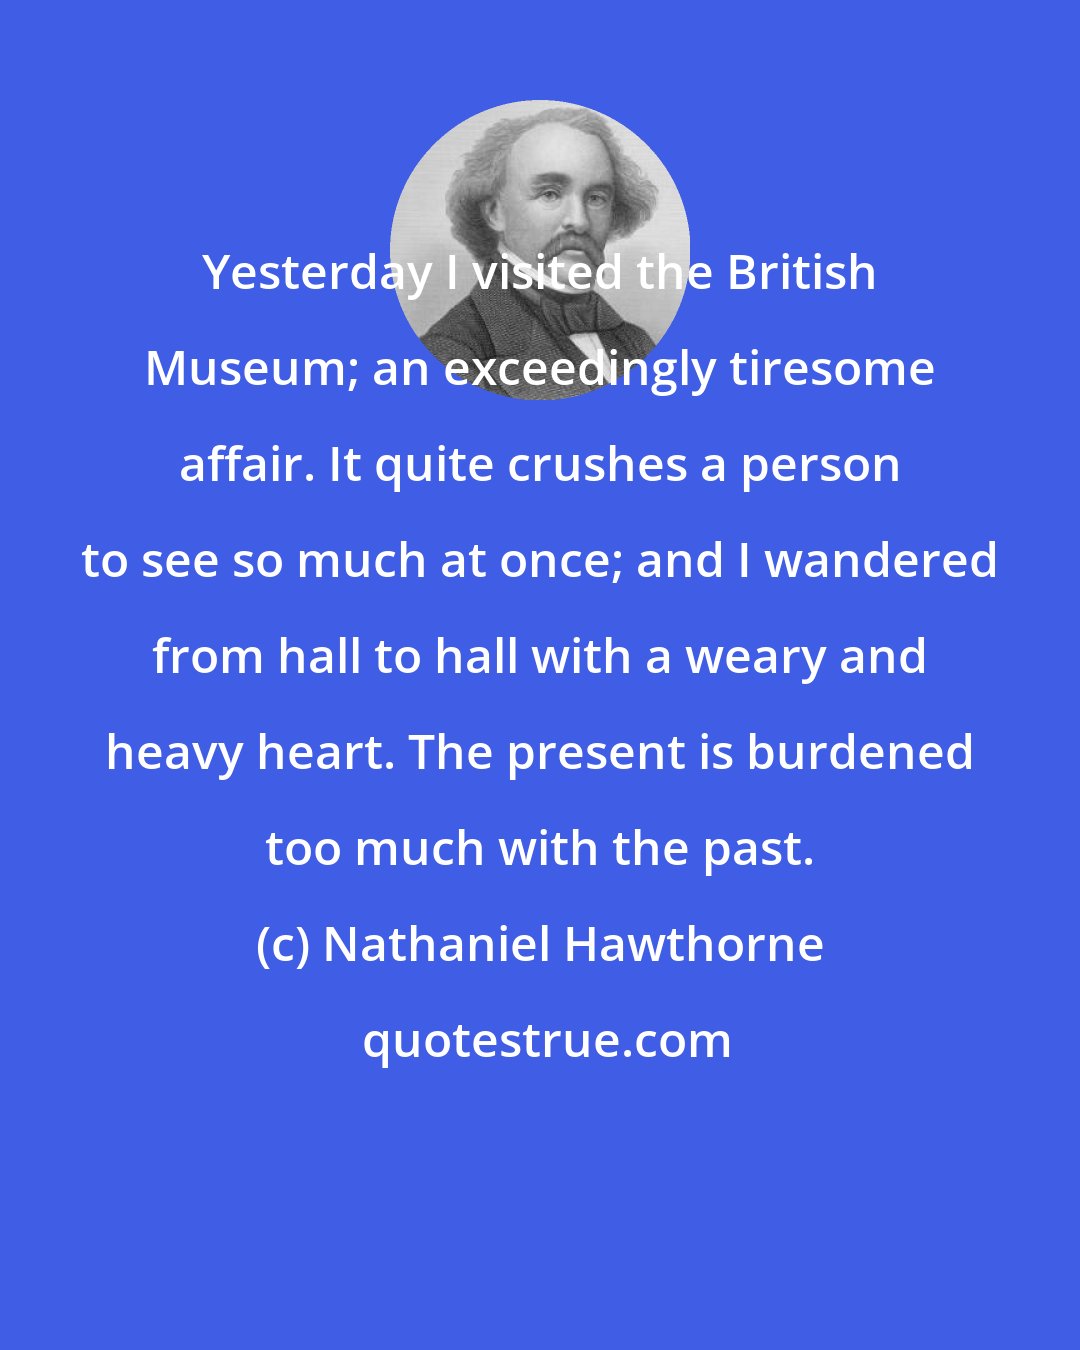 Nathaniel Hawthorne: Yesterday I visited the British Museum; an exceedingly tiresome affair. It quite crushes a person to see so much at once; and I wandered from hall to hall with a weary and heavy heart. The present is burdened too much with the past.